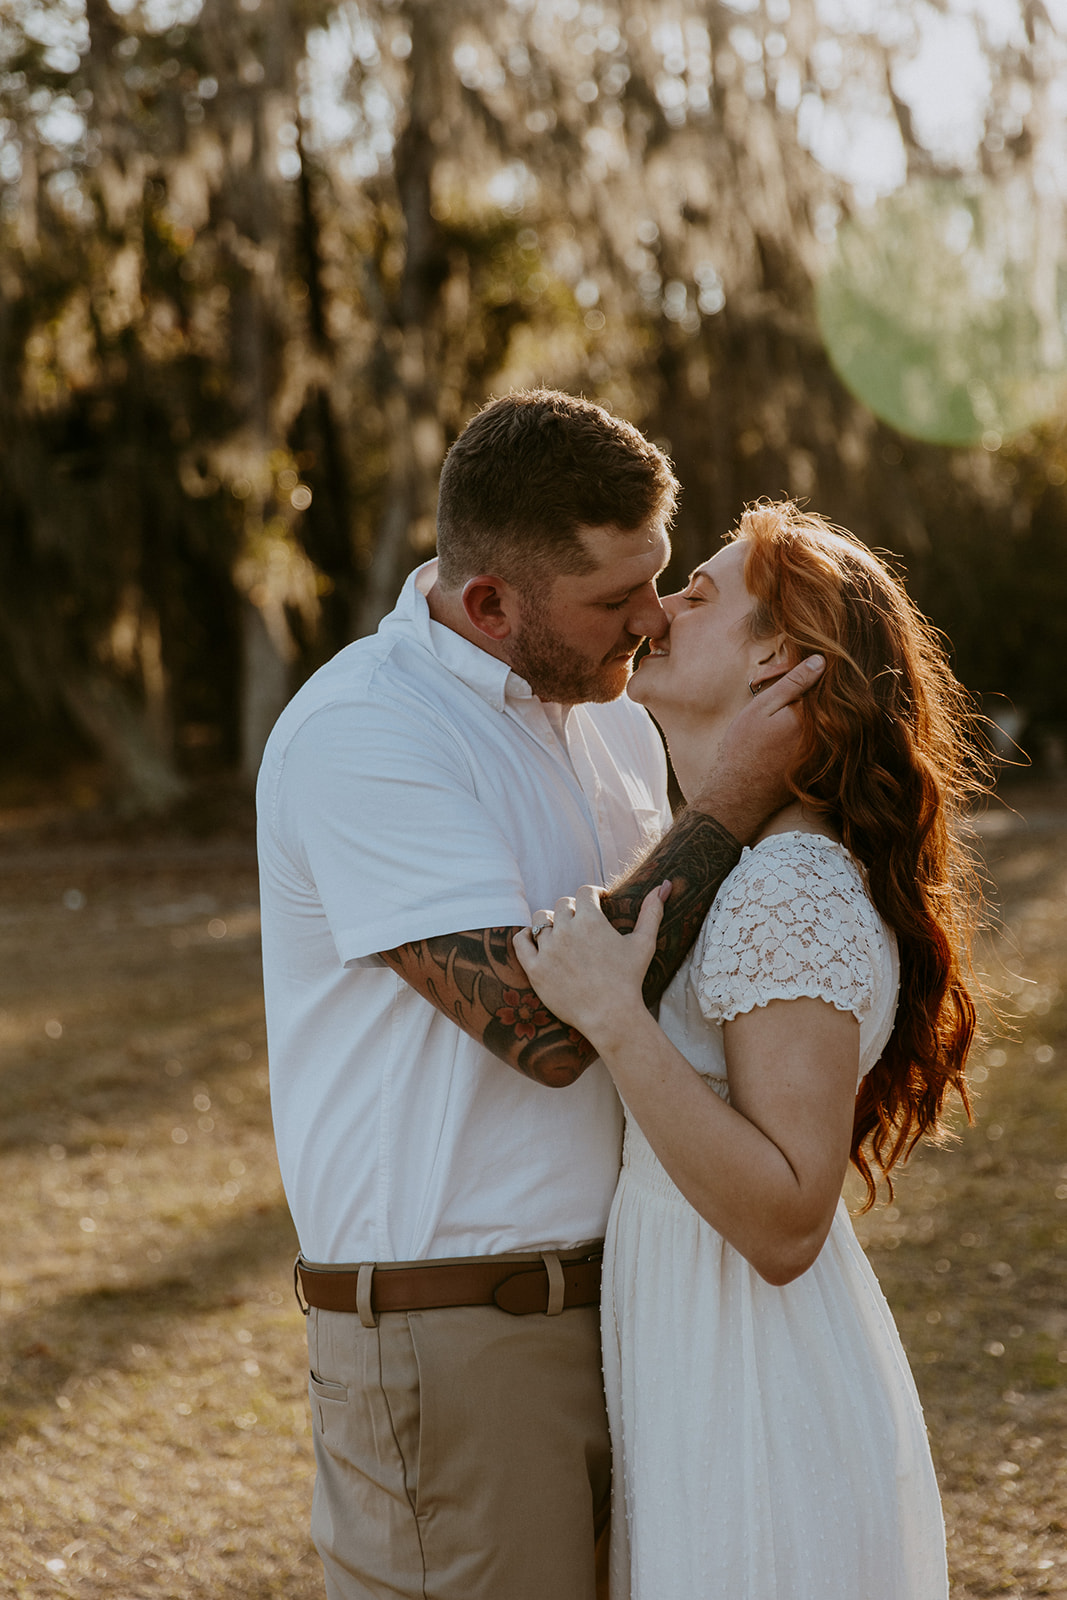 A couple embraces lovingly in a sunlit natural setting, touching foreheads and smiling at each other at their outdoor engagement photos